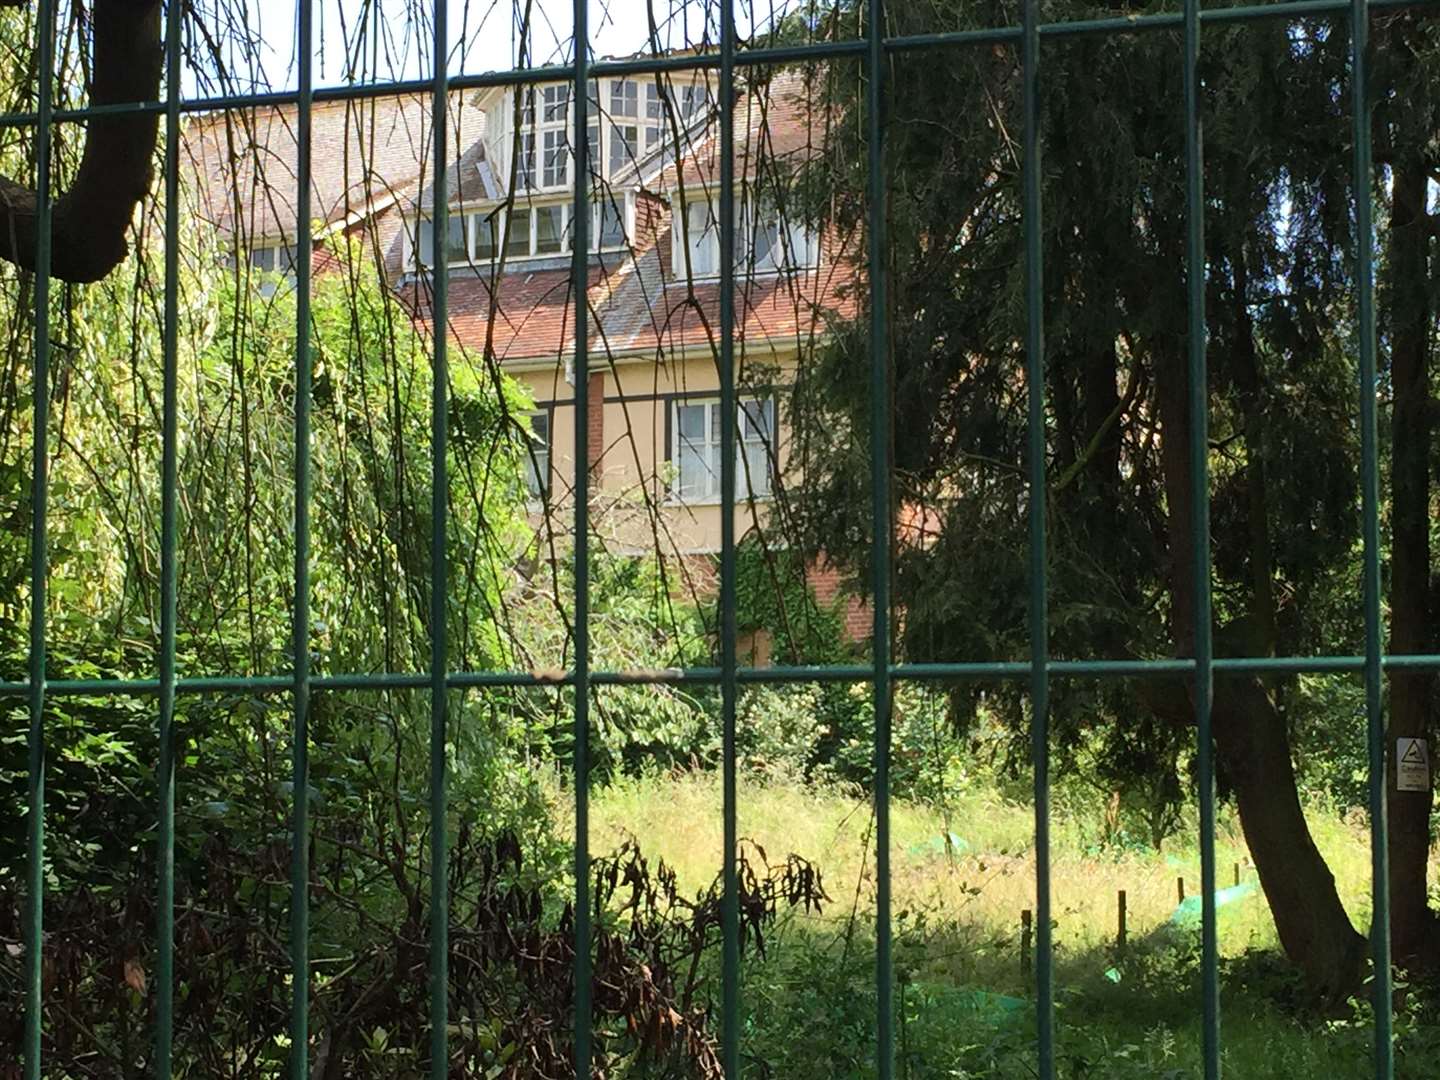 Herne Bay Court once had manicured lawns but is now overgrown and an eyesore